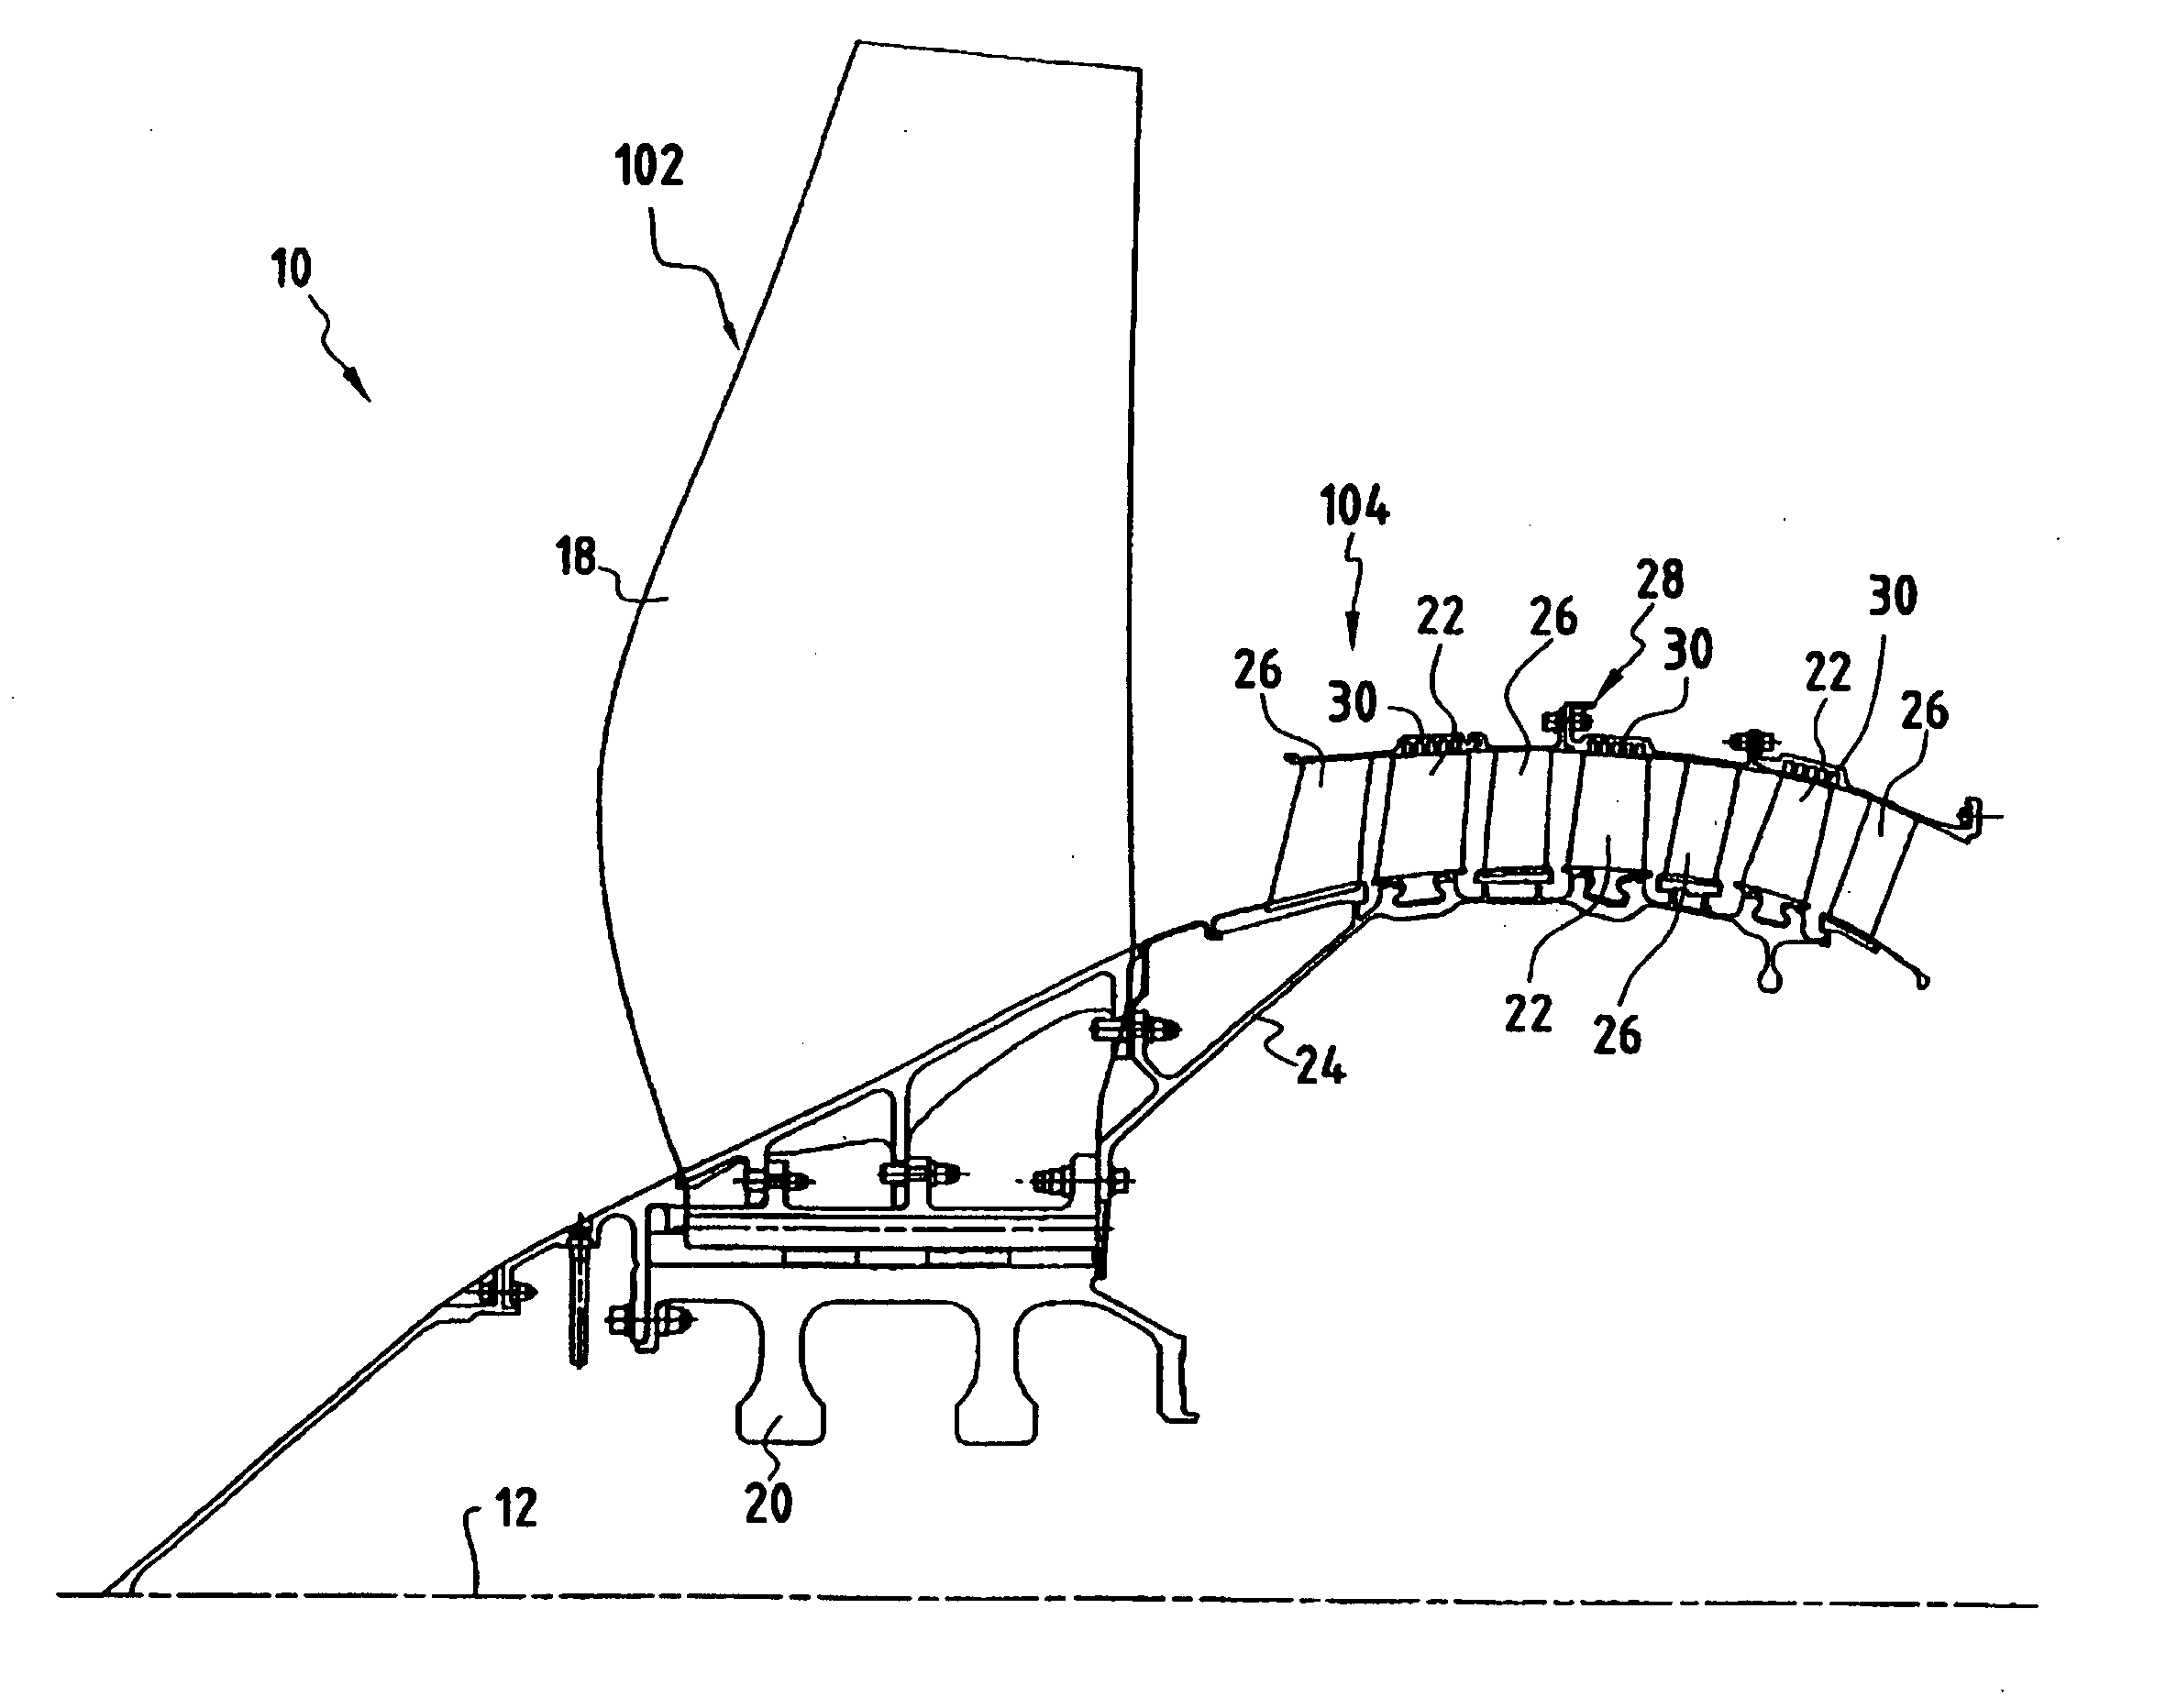 Abradable material composition, a thermomechanical part or casing including a coating, and a method of fabricating or repairing a coating presenting said composition